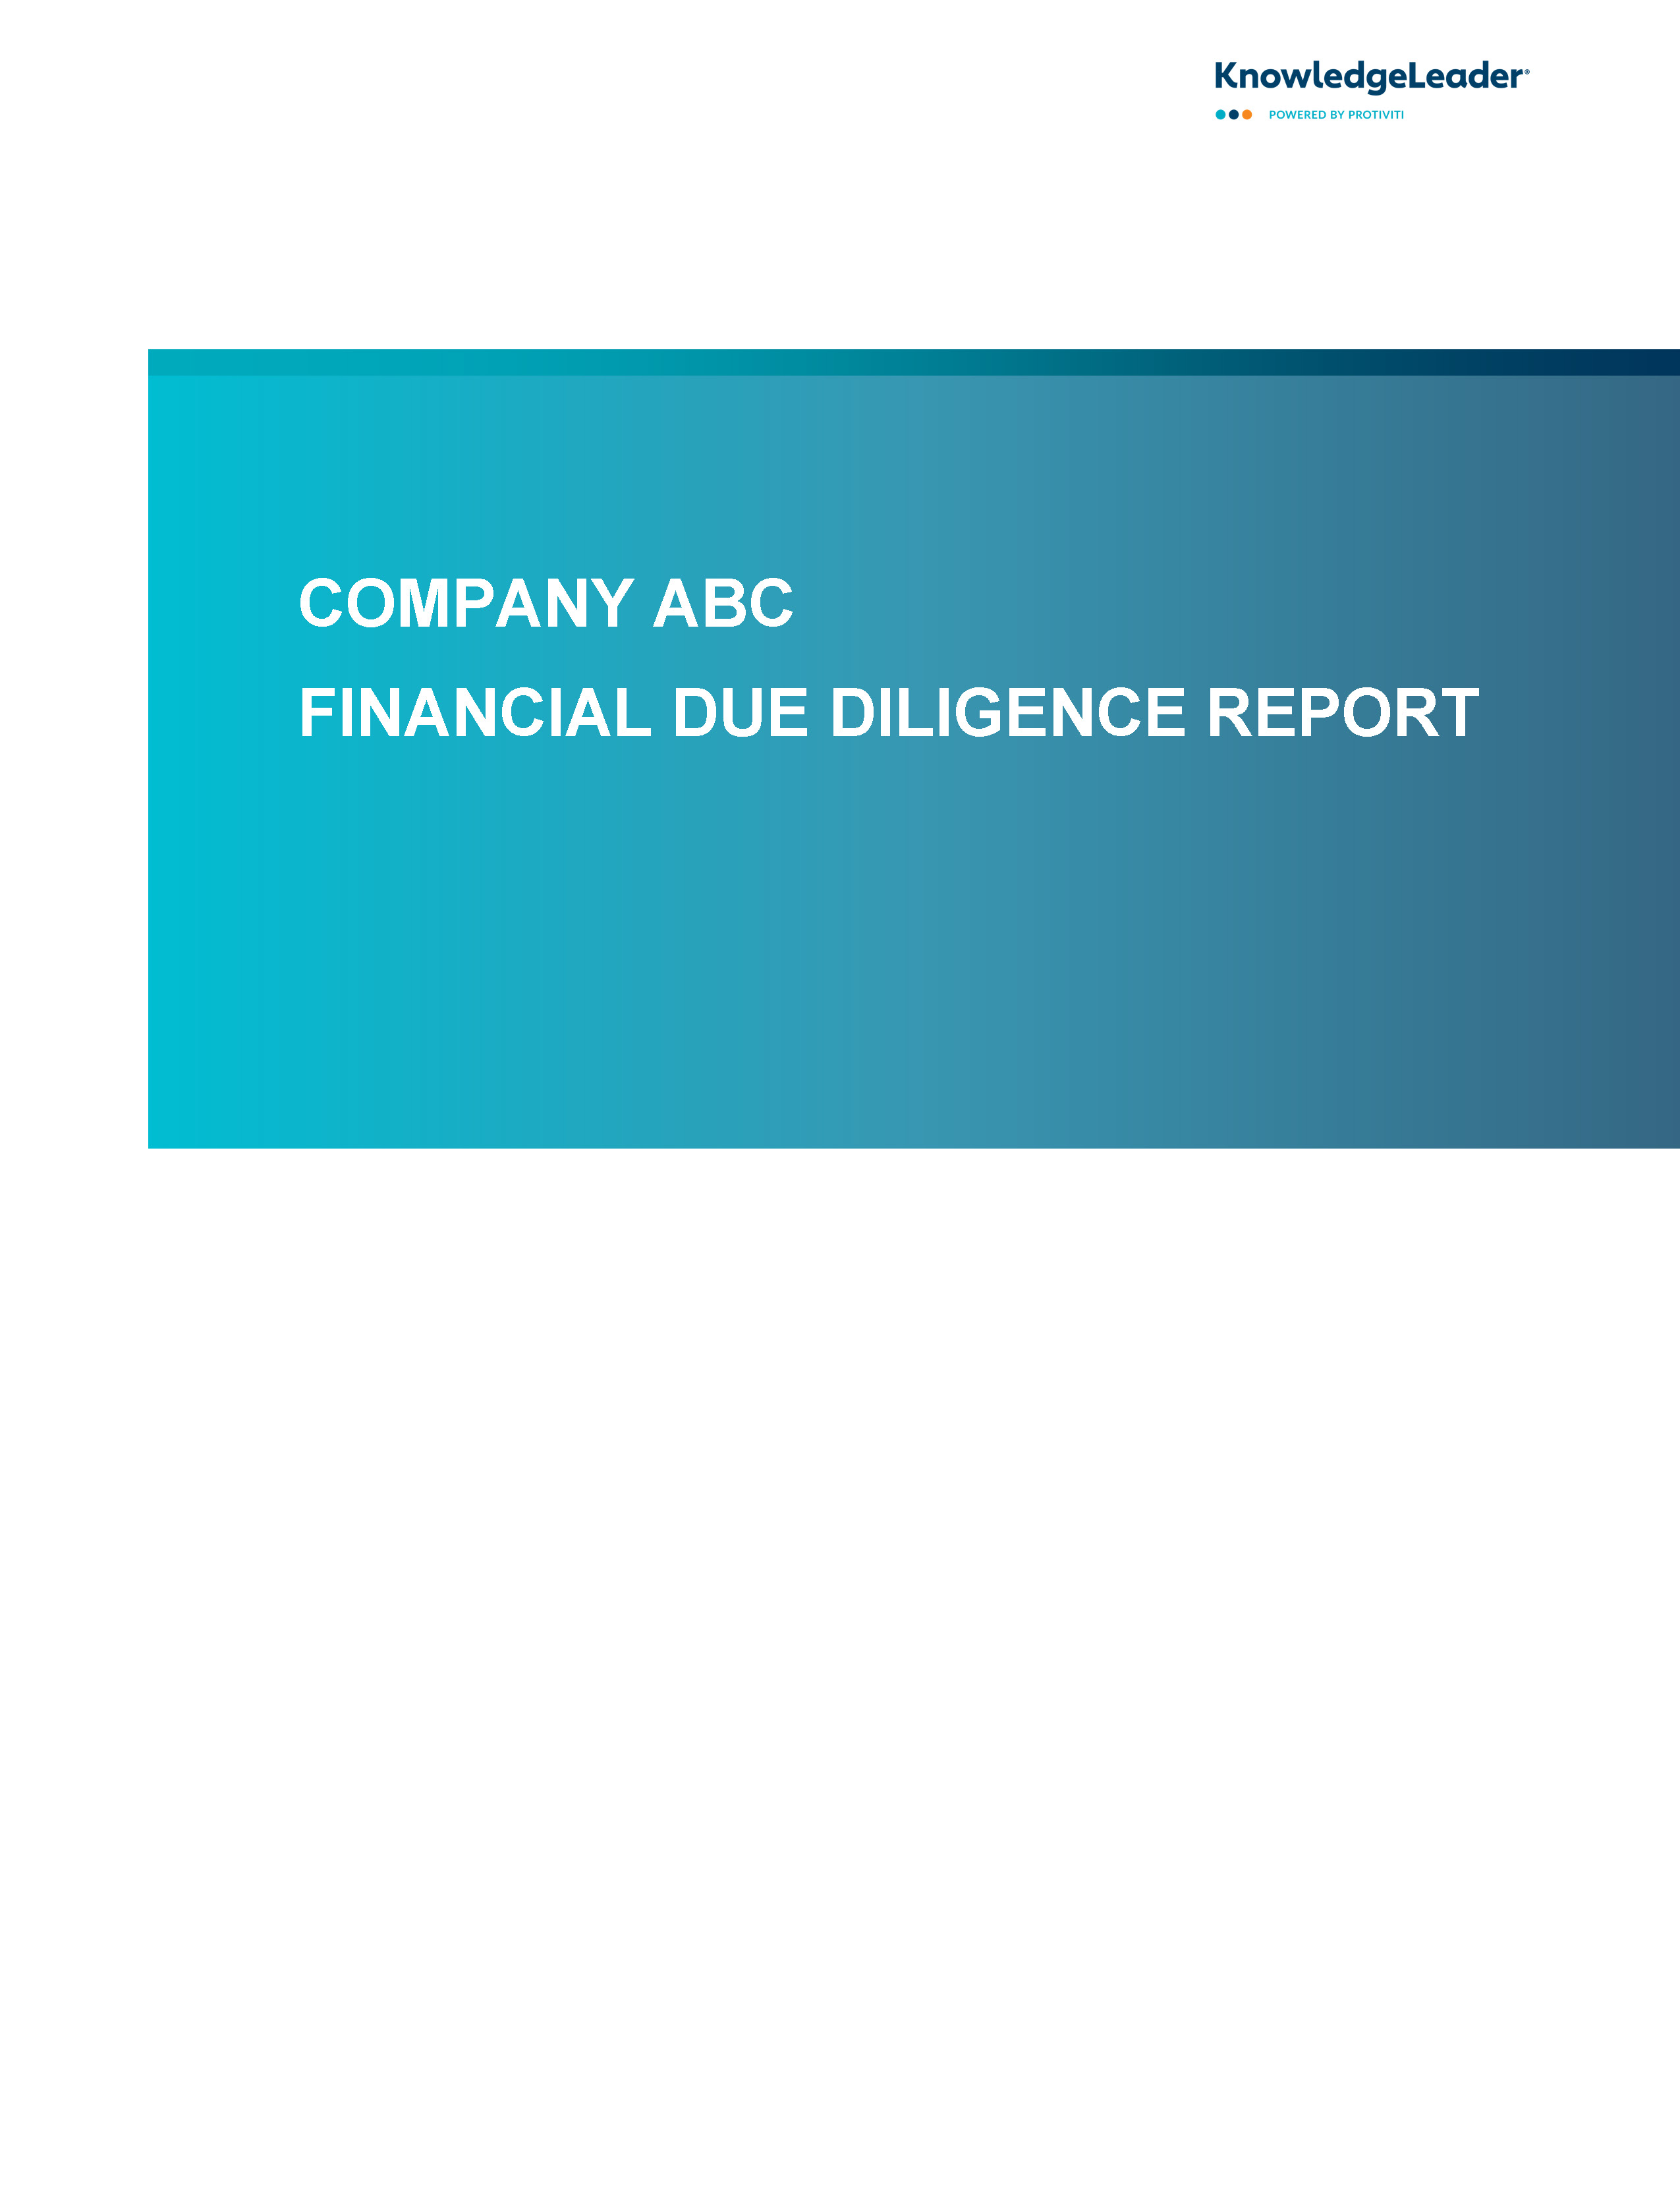 Screenshot of the first page of Financial Due Diligence Report